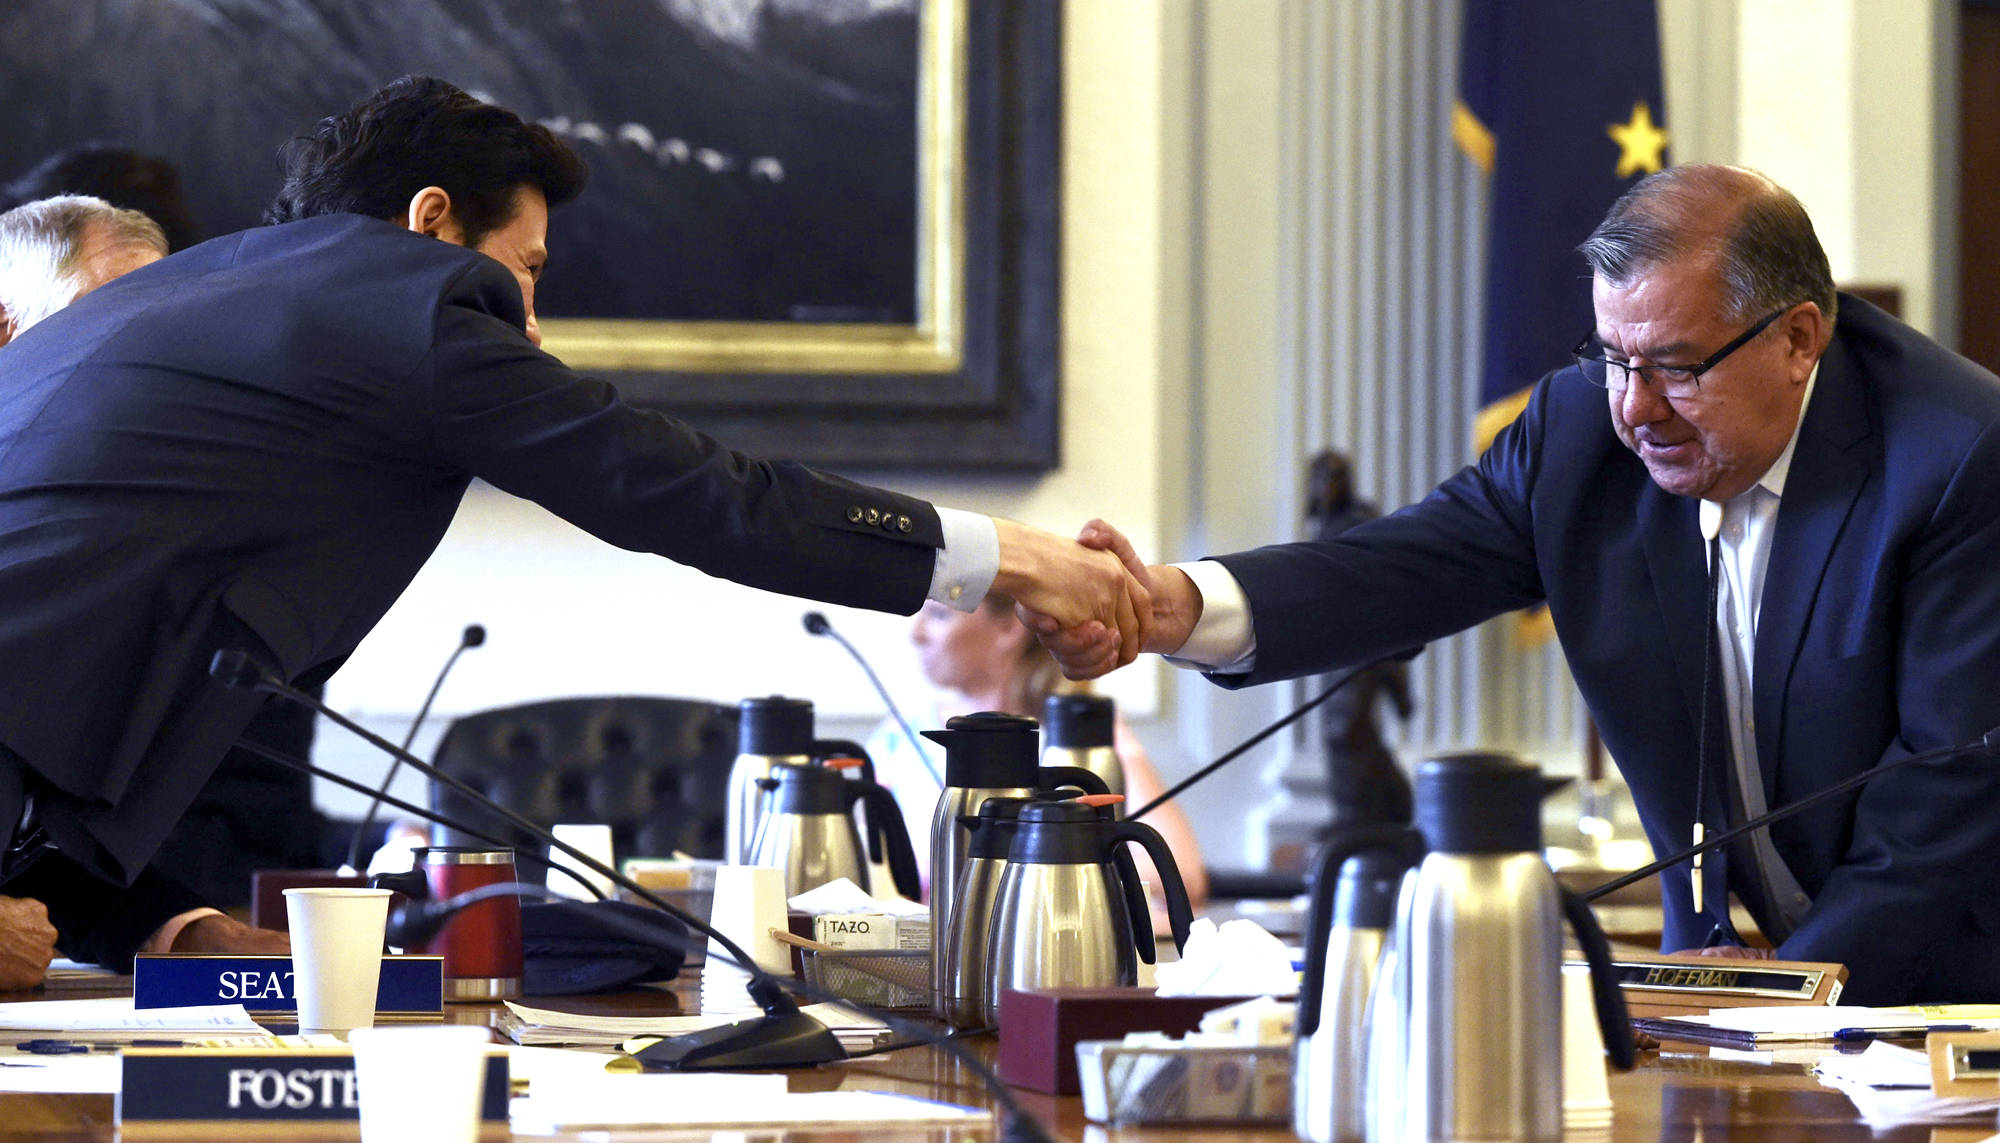 Rep. Neal Foster, D-Nome, left, shakes hands with Sen. Lyman Hoffman, D-Bethel, after an agreement is made on the capital budget in conference committee at the Capitol on Thursday, July 27, 2017. (Michael Penn | Juneau Empire)